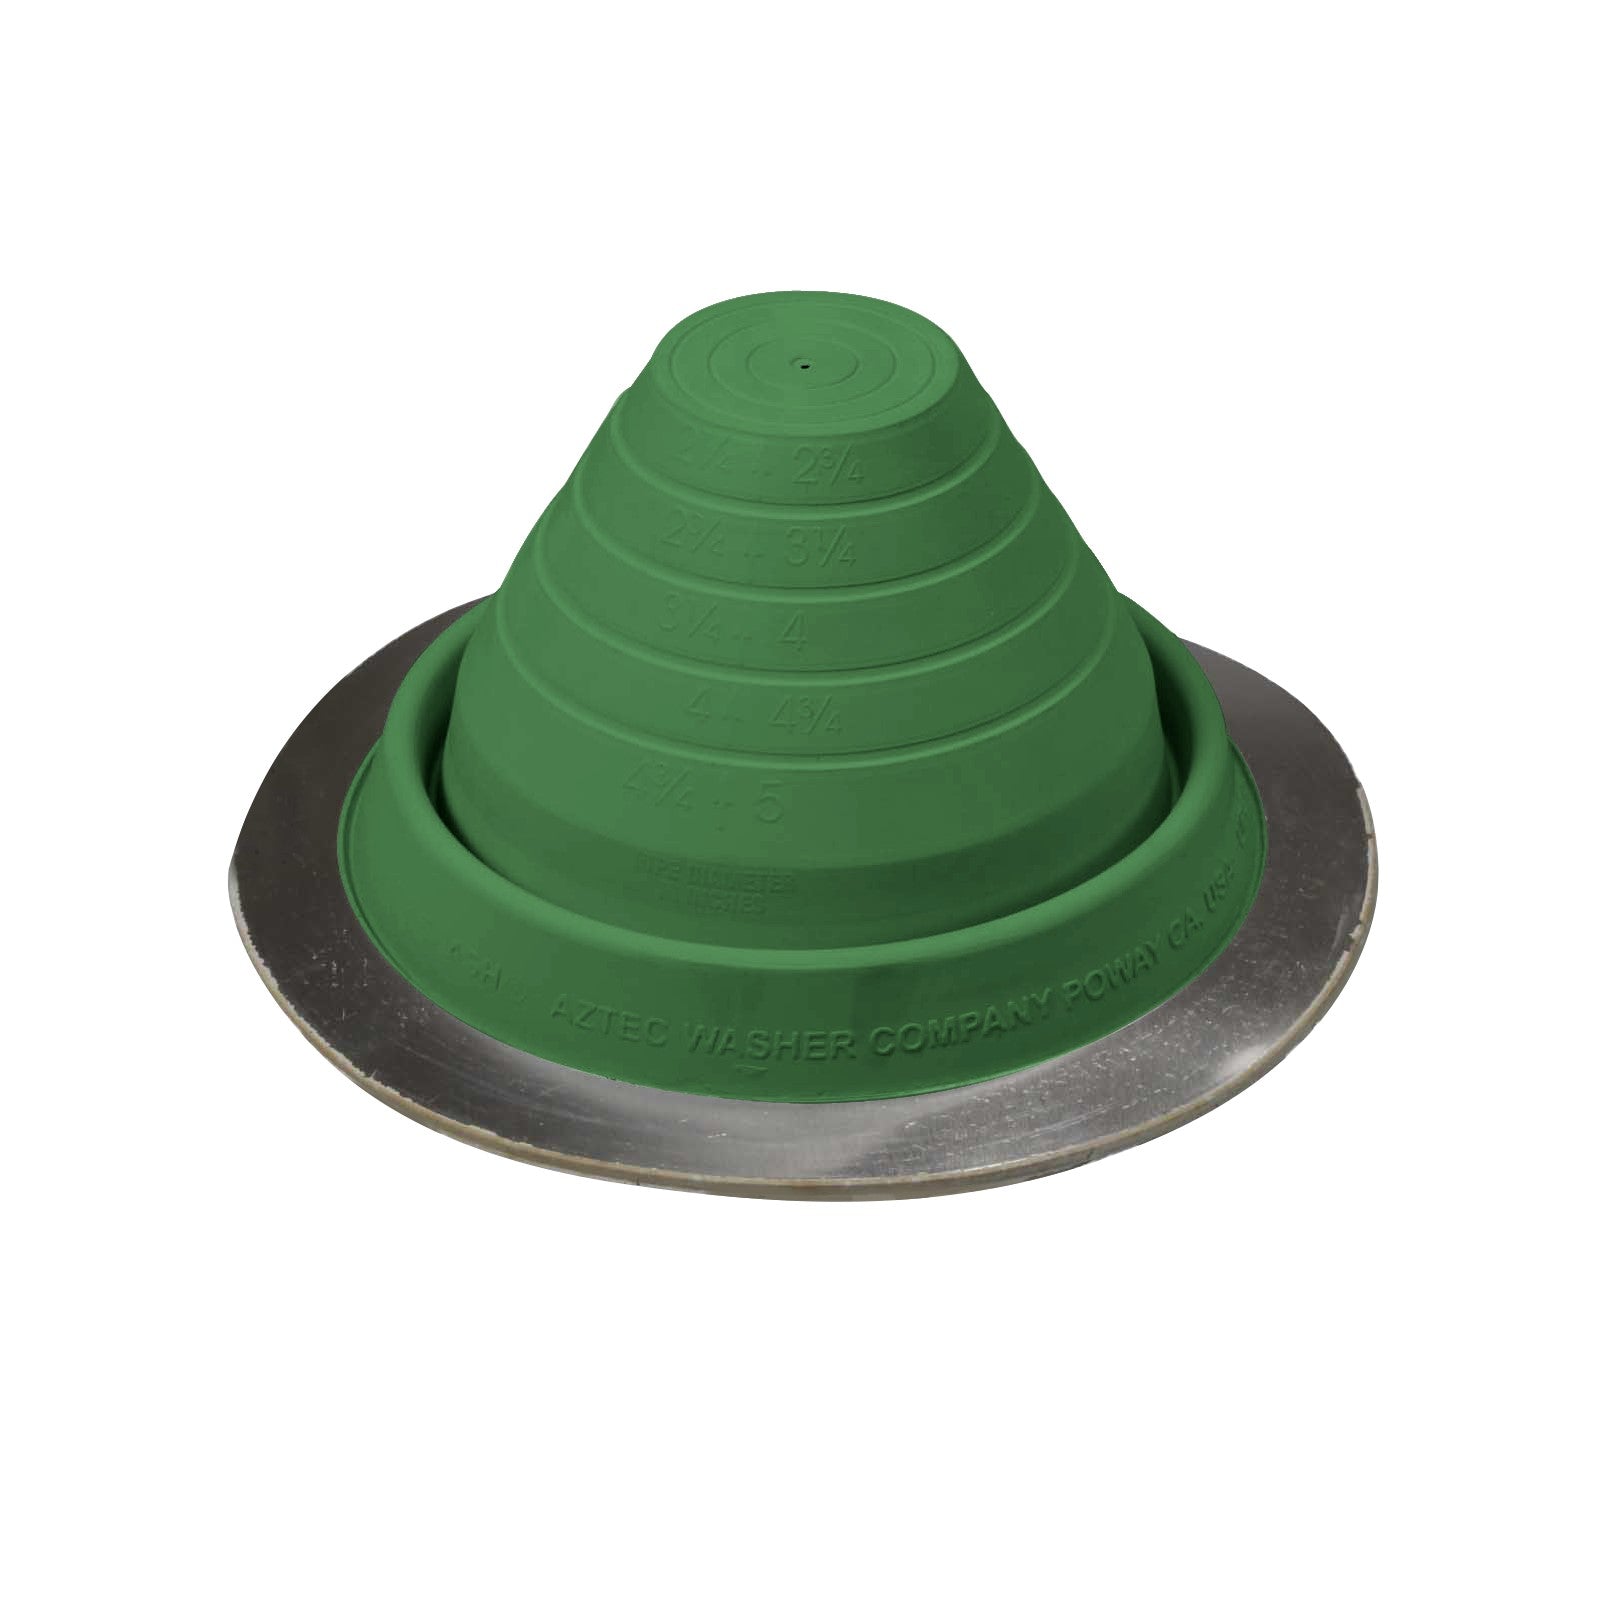 #3 Roofjack Round EPDM Pipe Flashing Boot Light Green